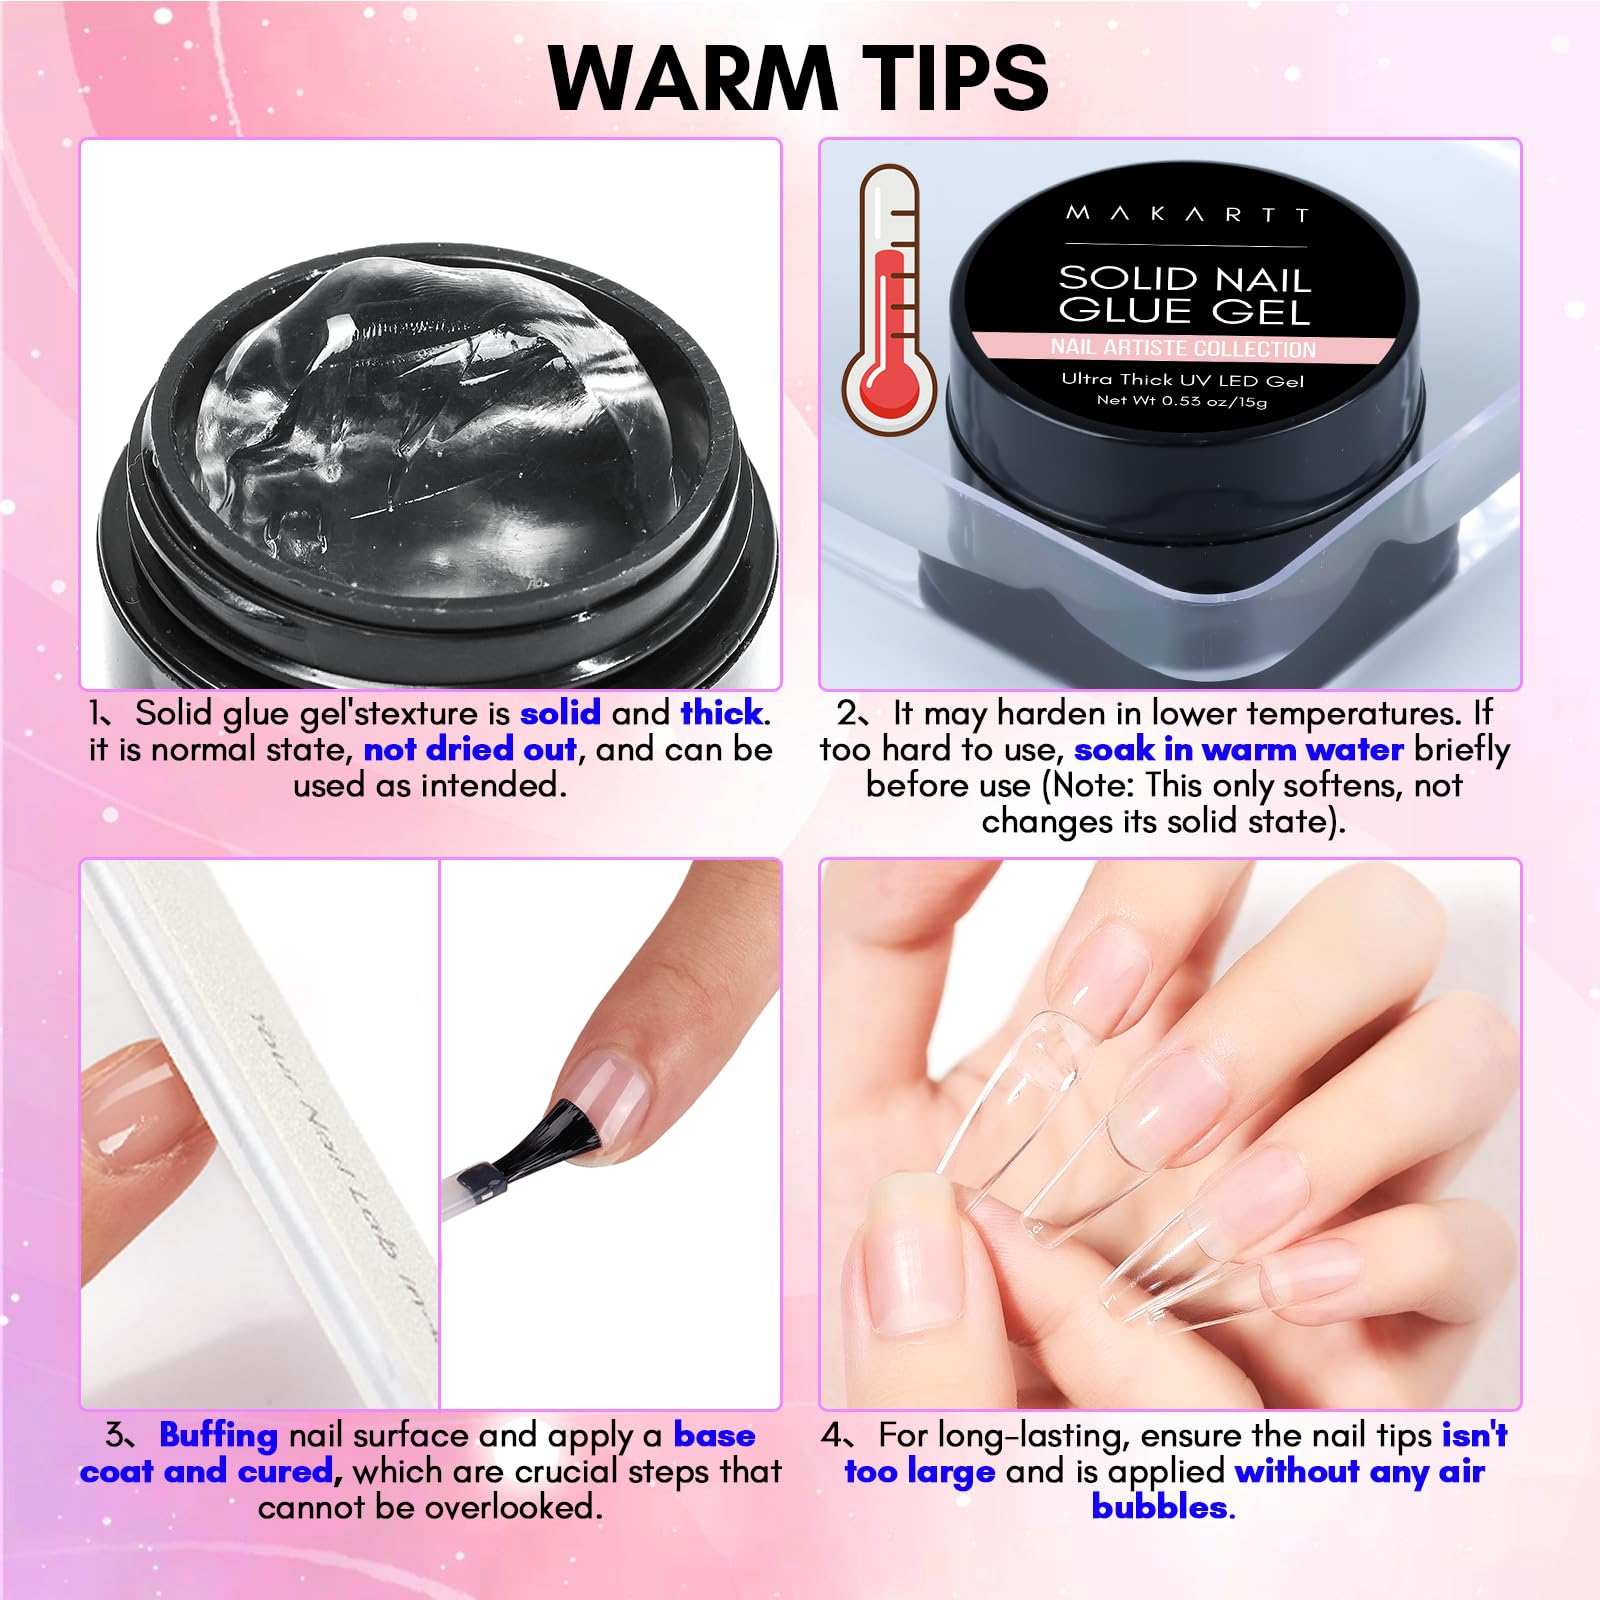 Upgrade Solid Nail Gel Glue for Soft Gel Nail Tips - Clear 15g